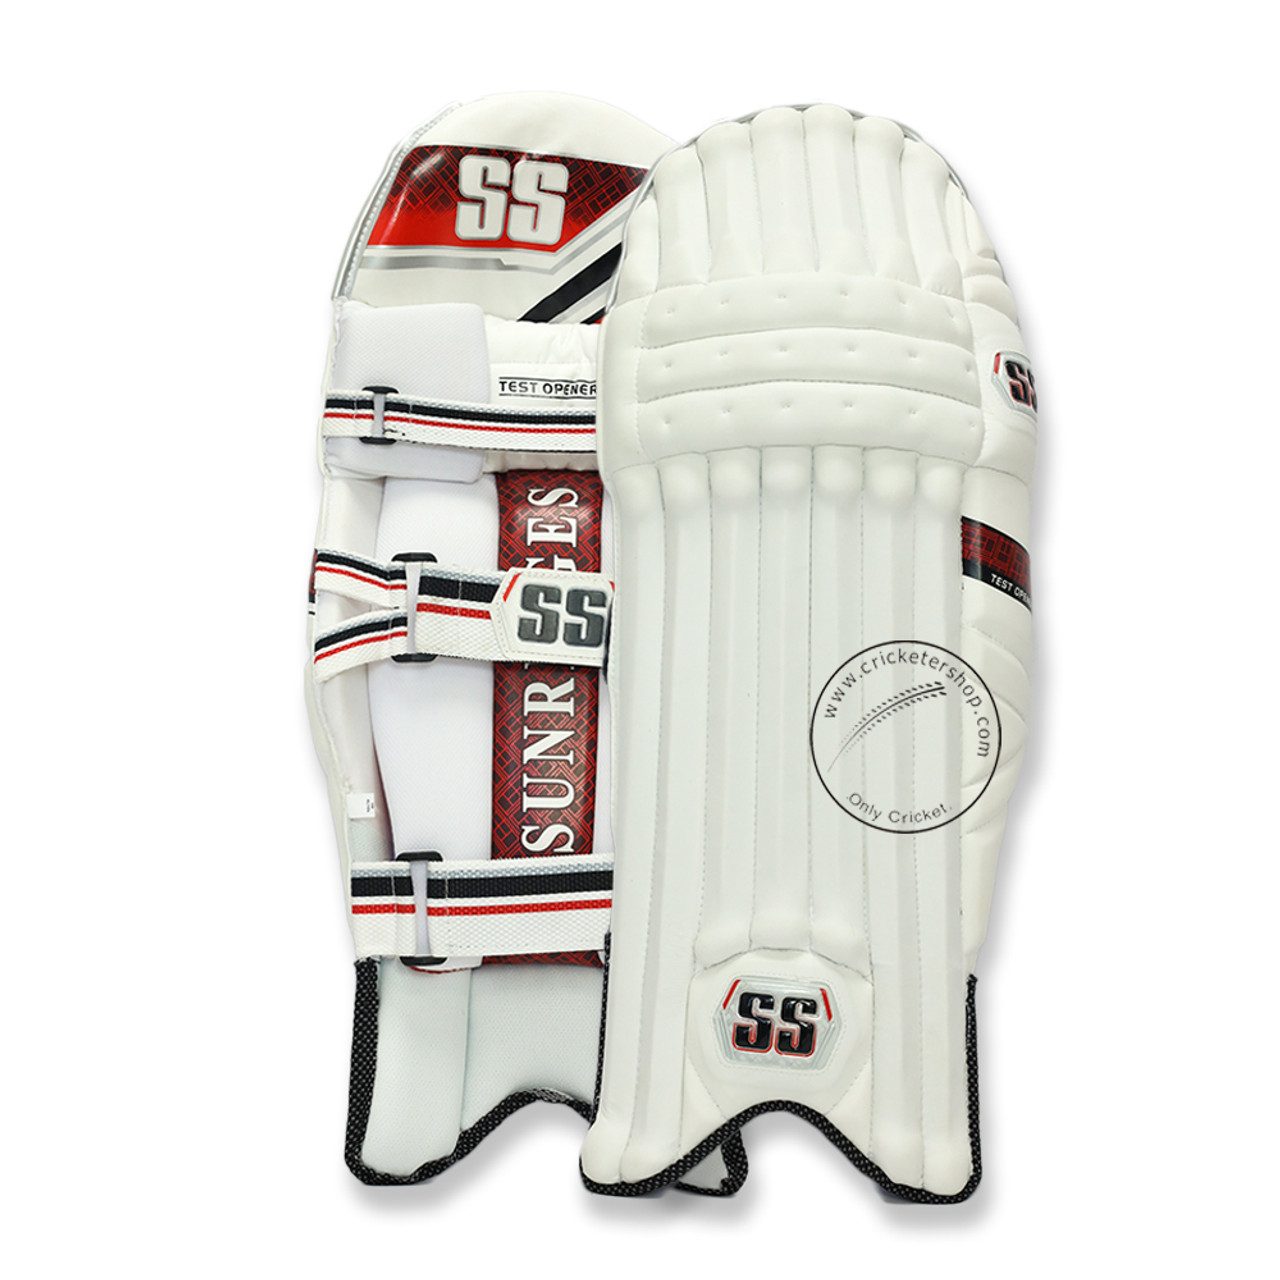 SS Test Opener Leg Guard Pads | Buy Online at India's Top Cricket ...